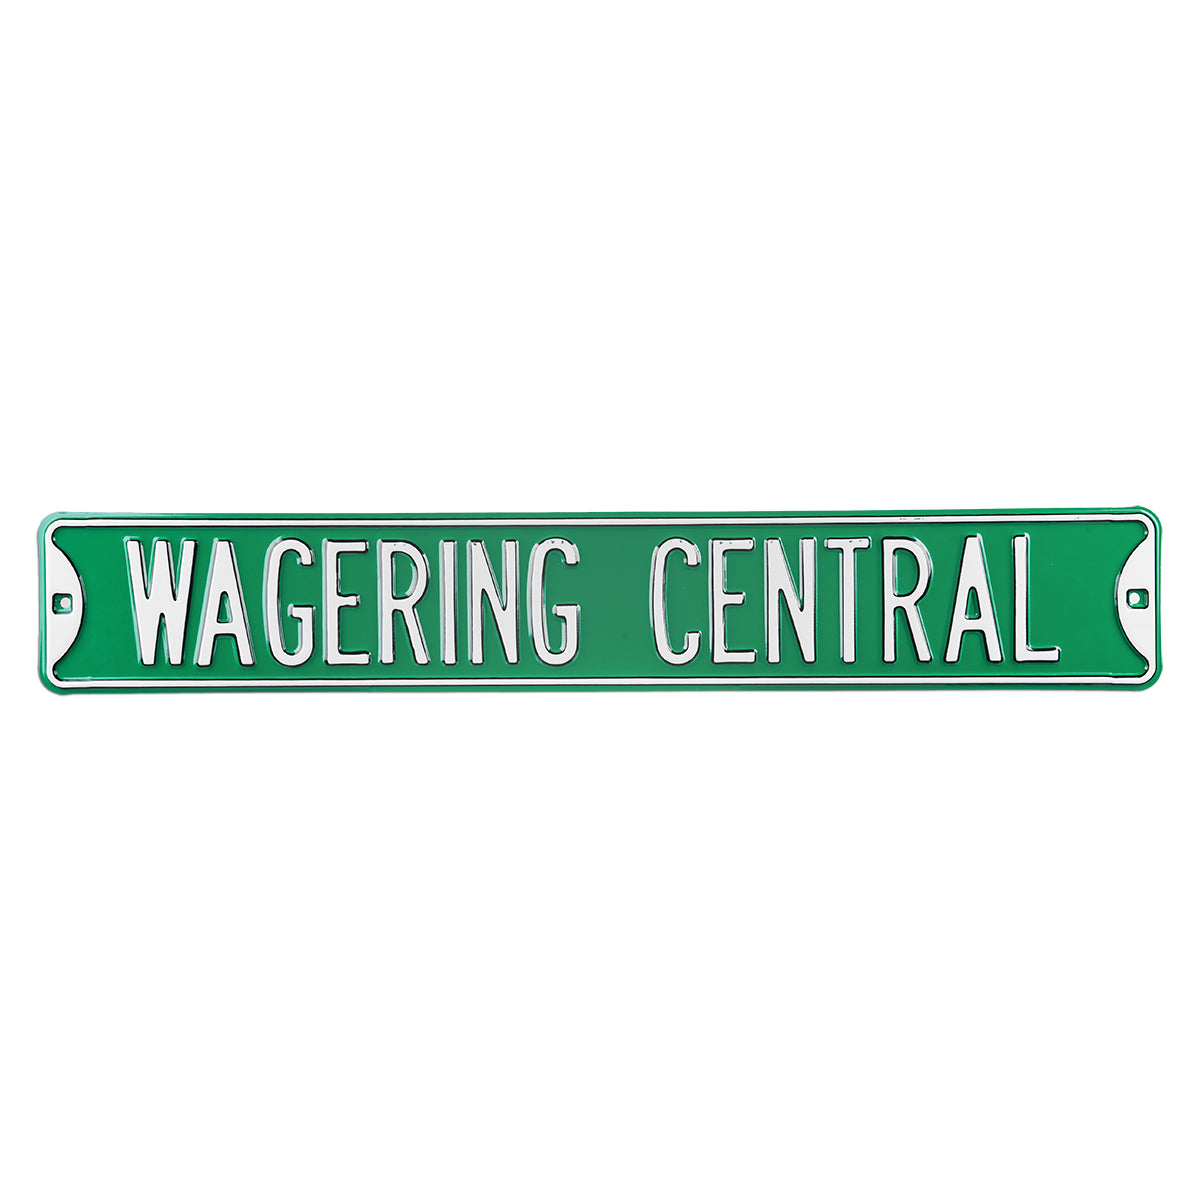 Wagering Central Street Sign